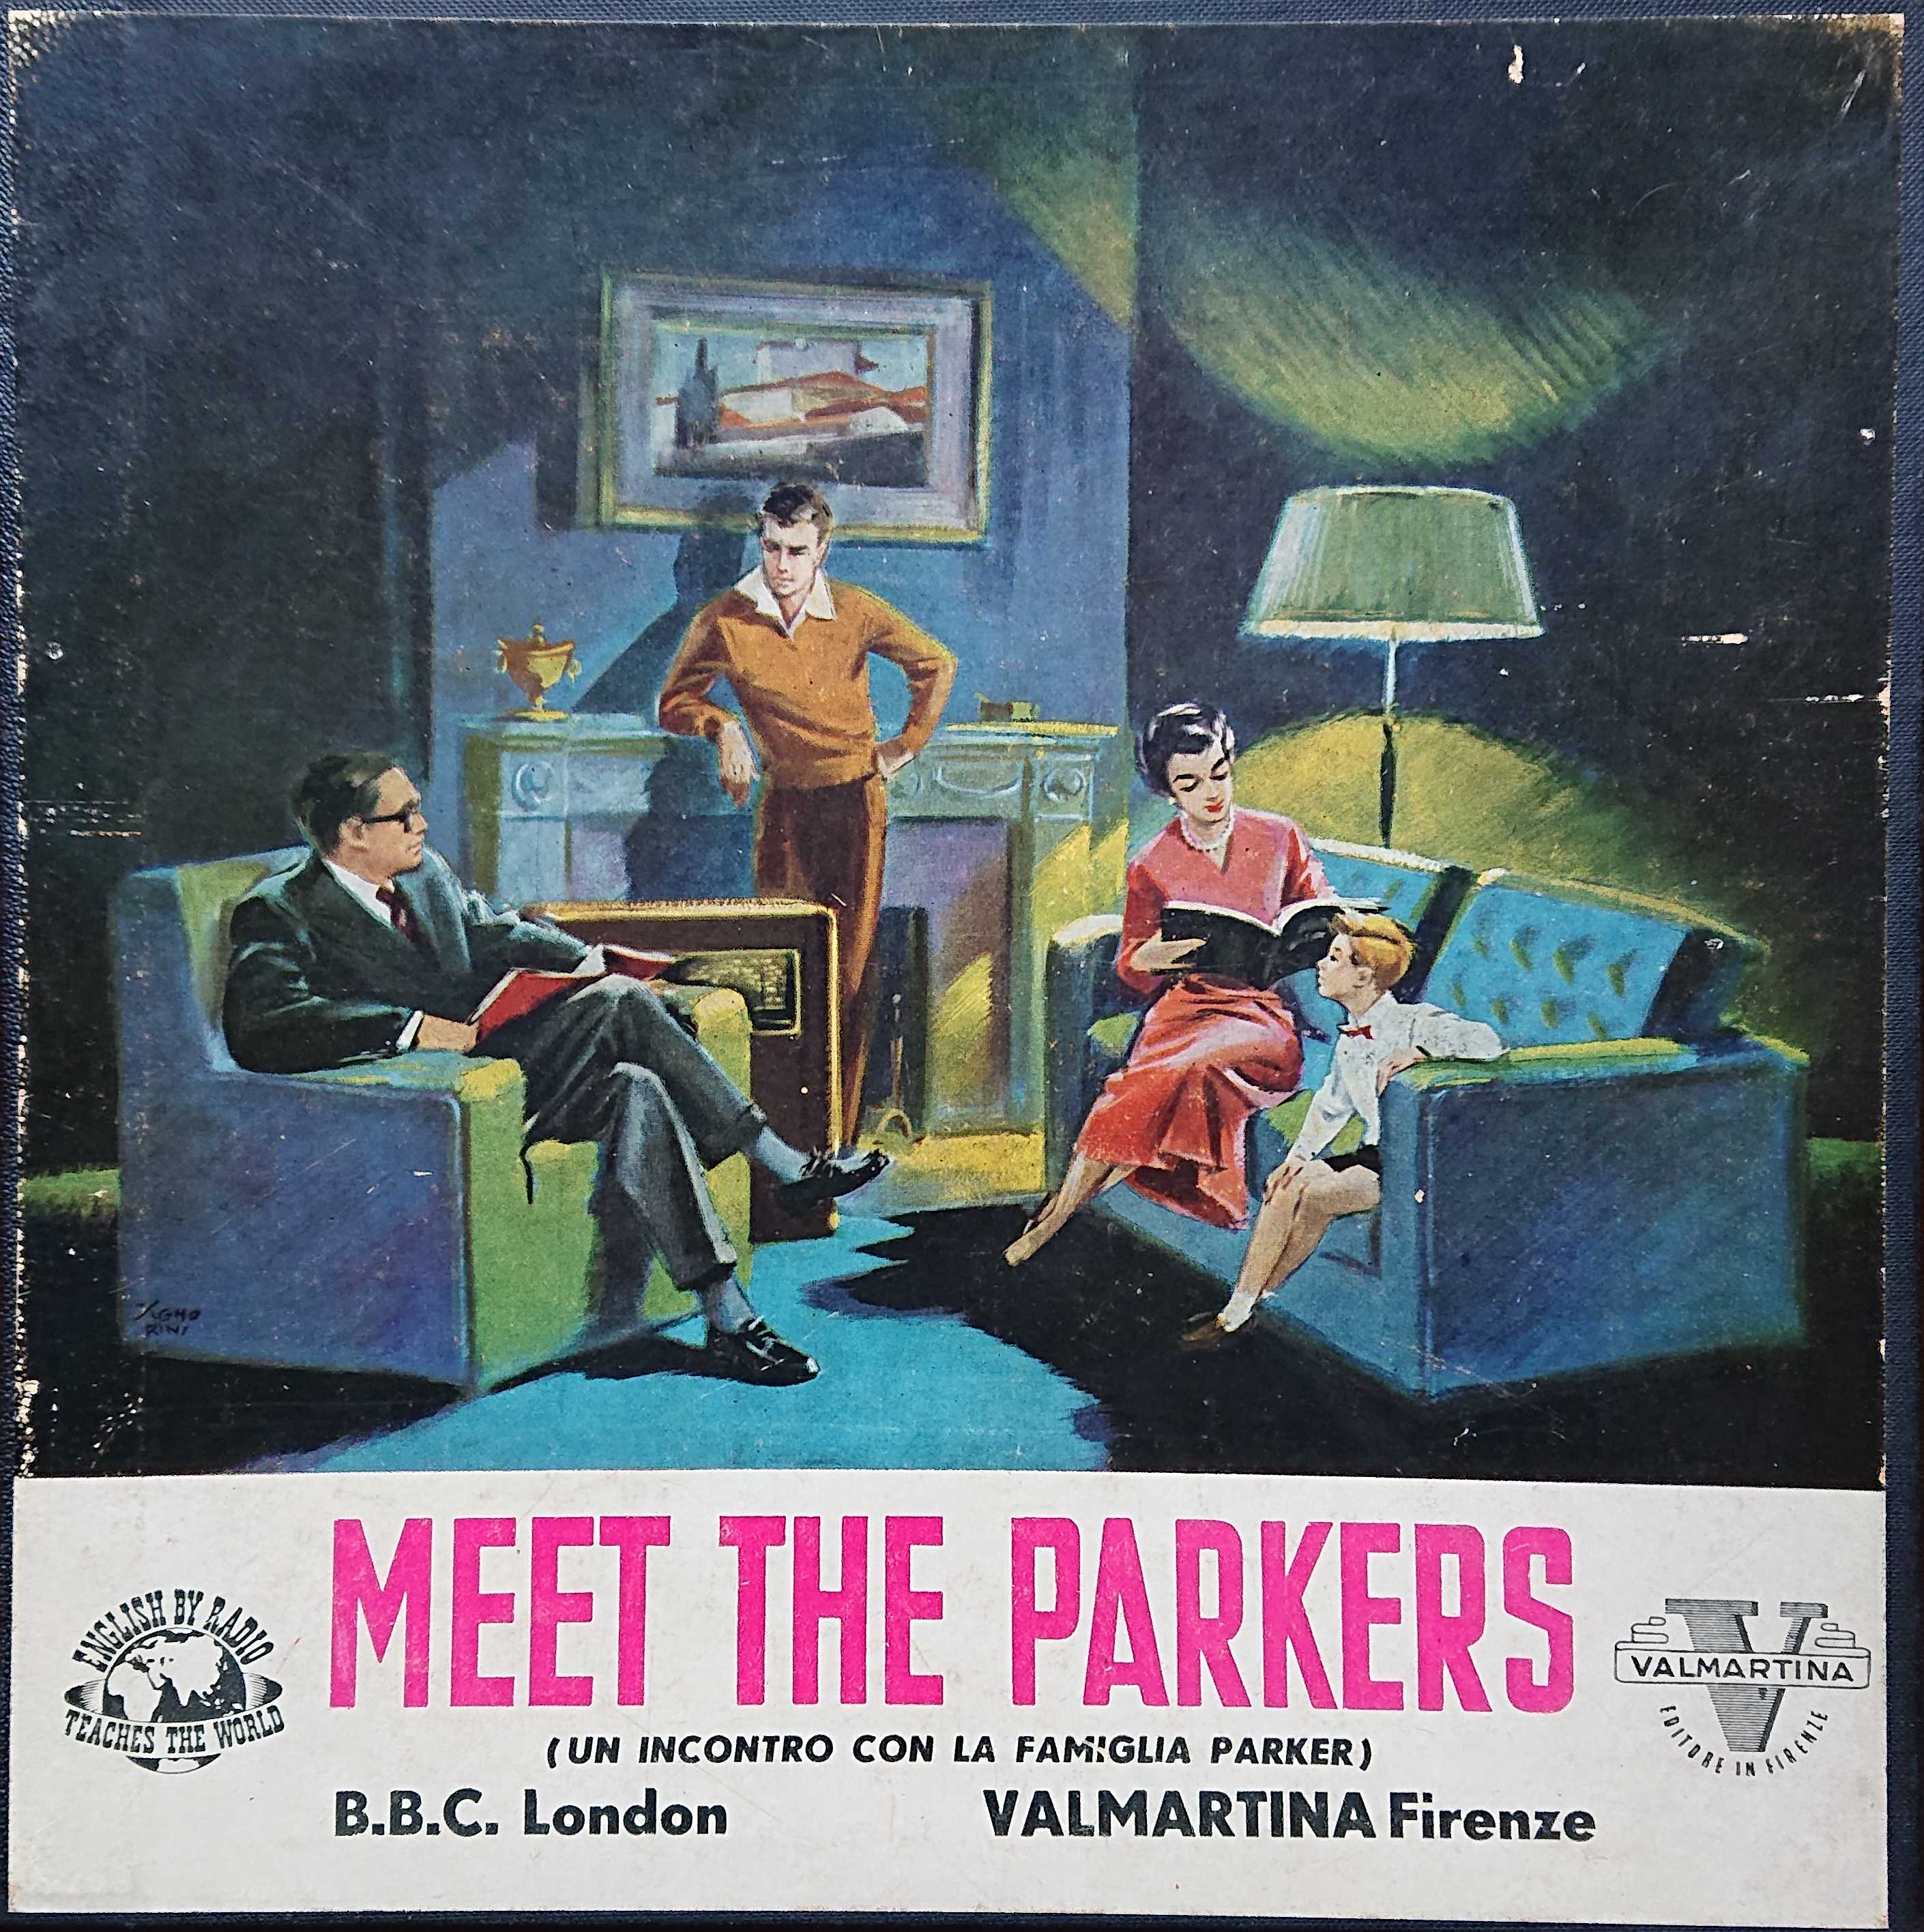 Picture of Meet the Parkers by artist Various from the BBC 10inches - Records and Tapes library